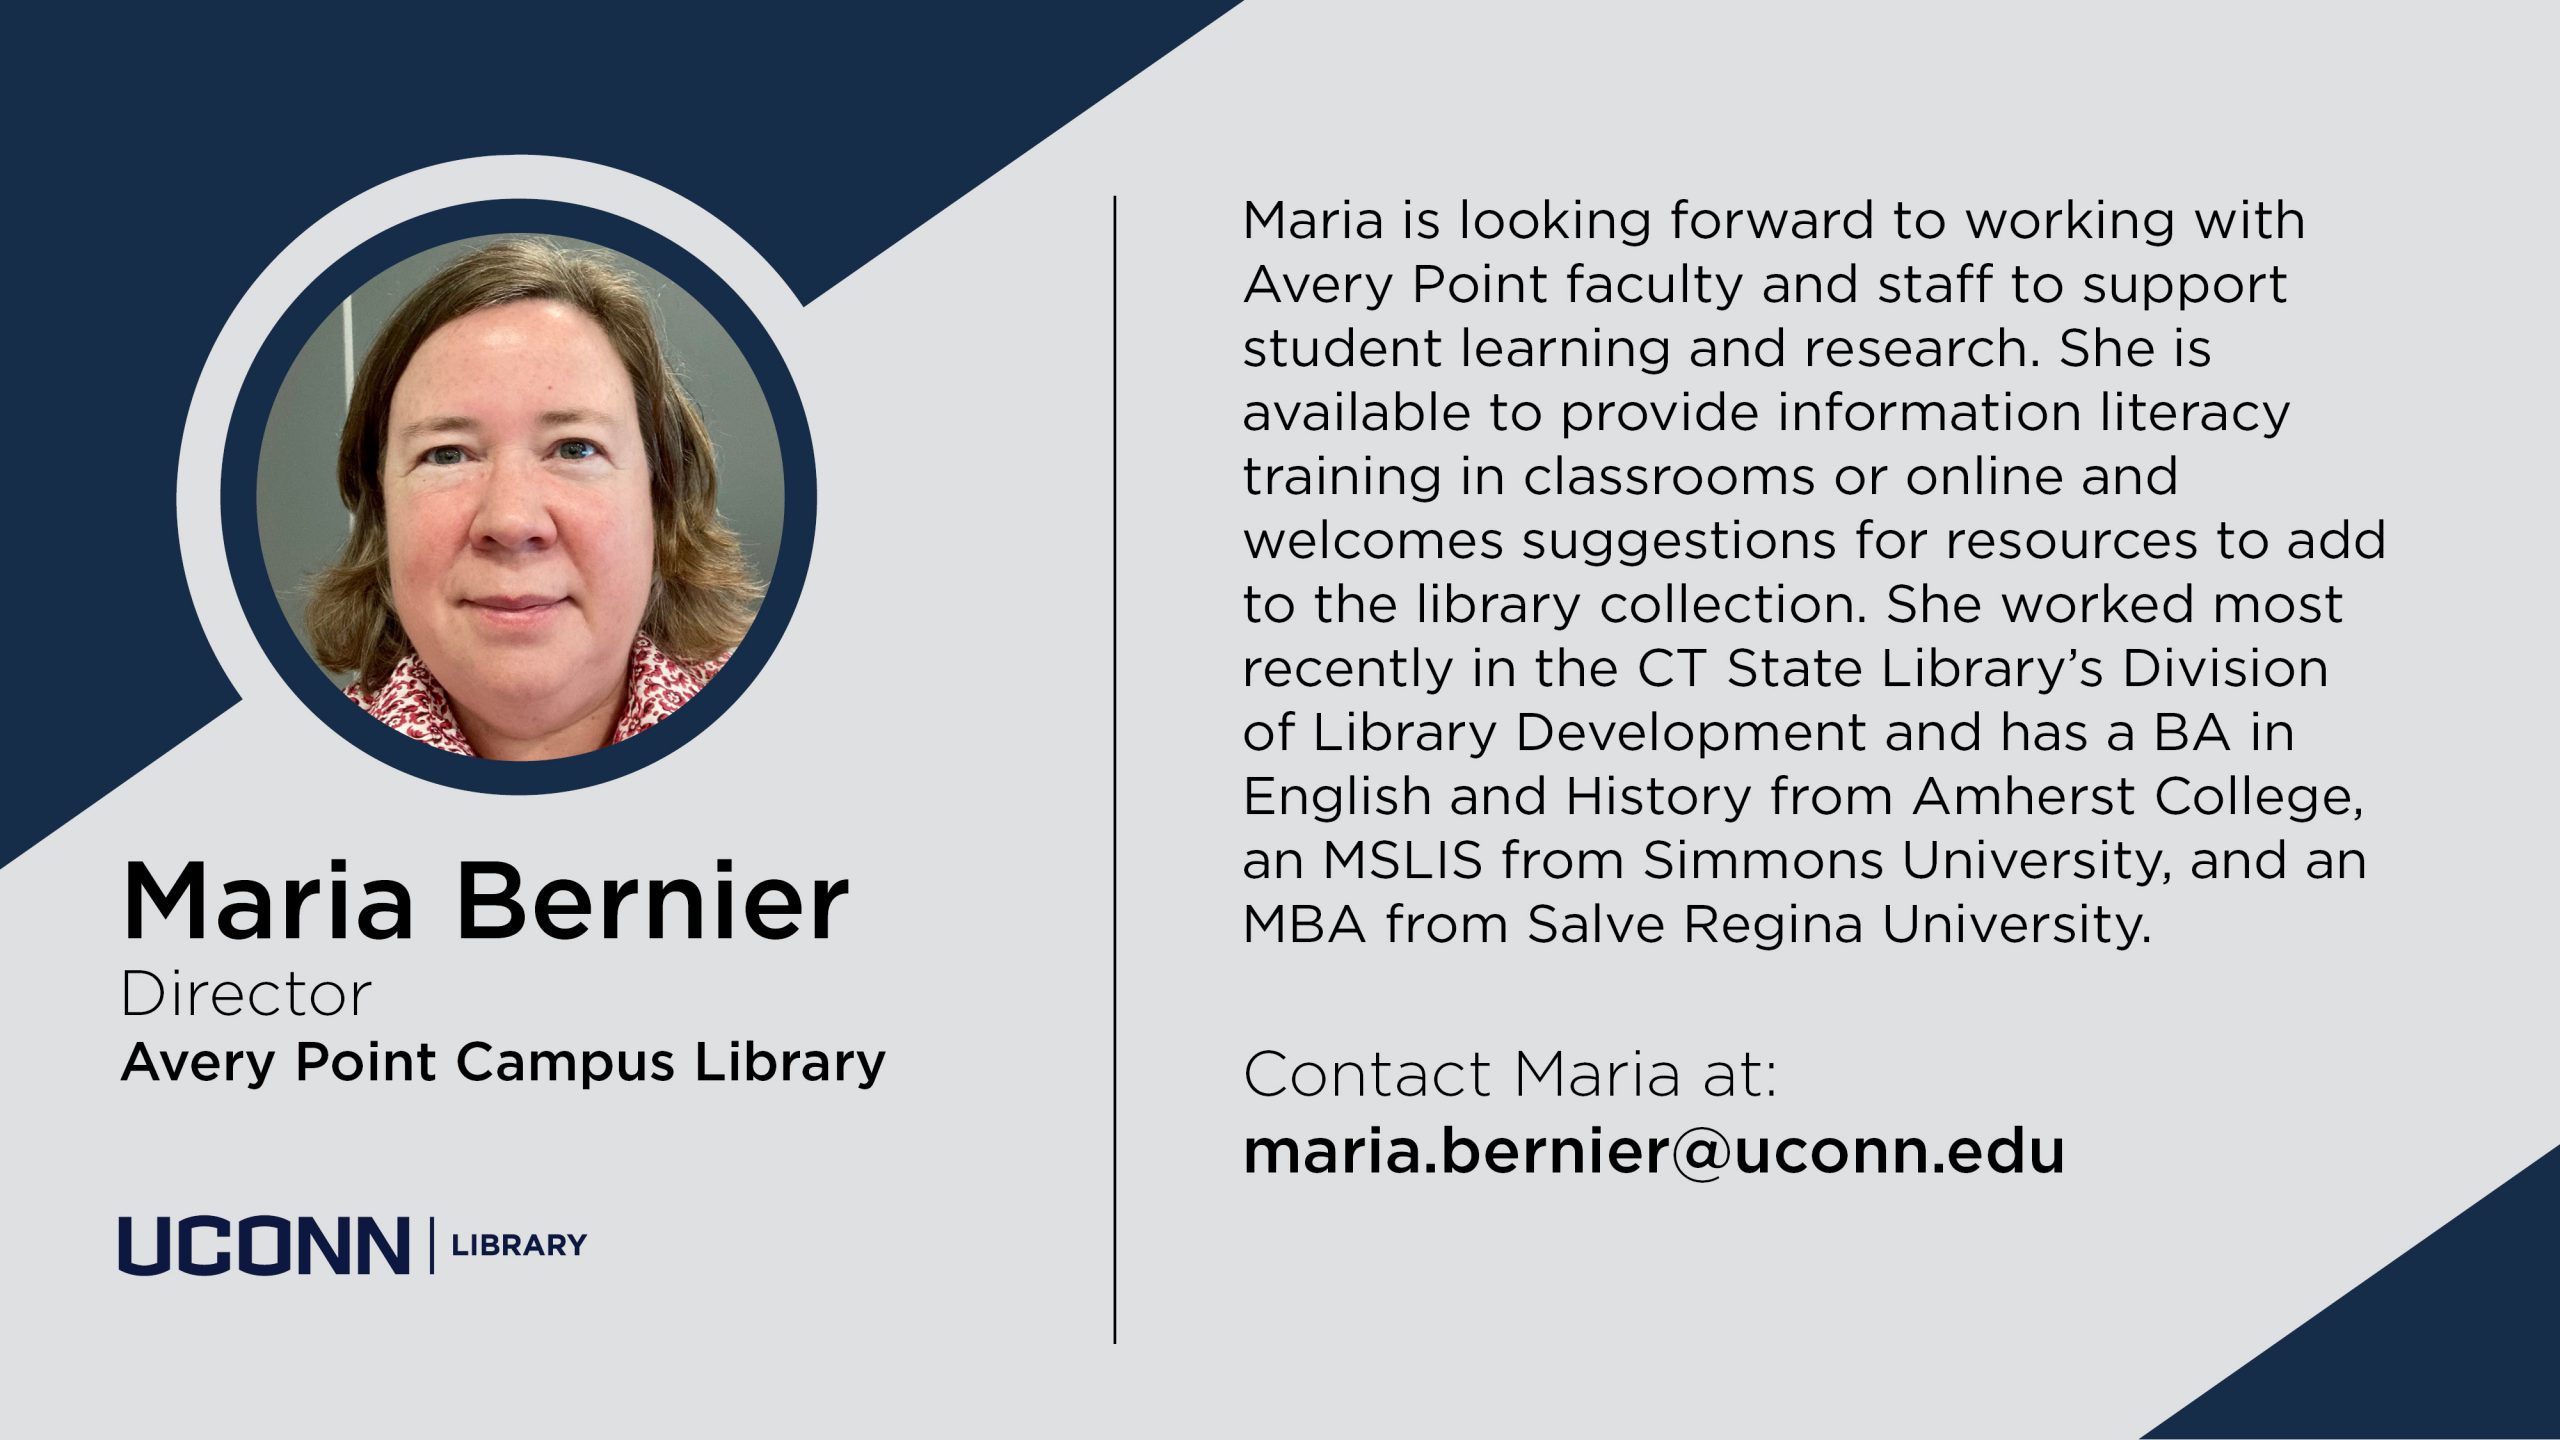 Welcome to new staff member, Maria Bernier! Learn more at https://lib.uconn.edu/about/directory/maria-bernier